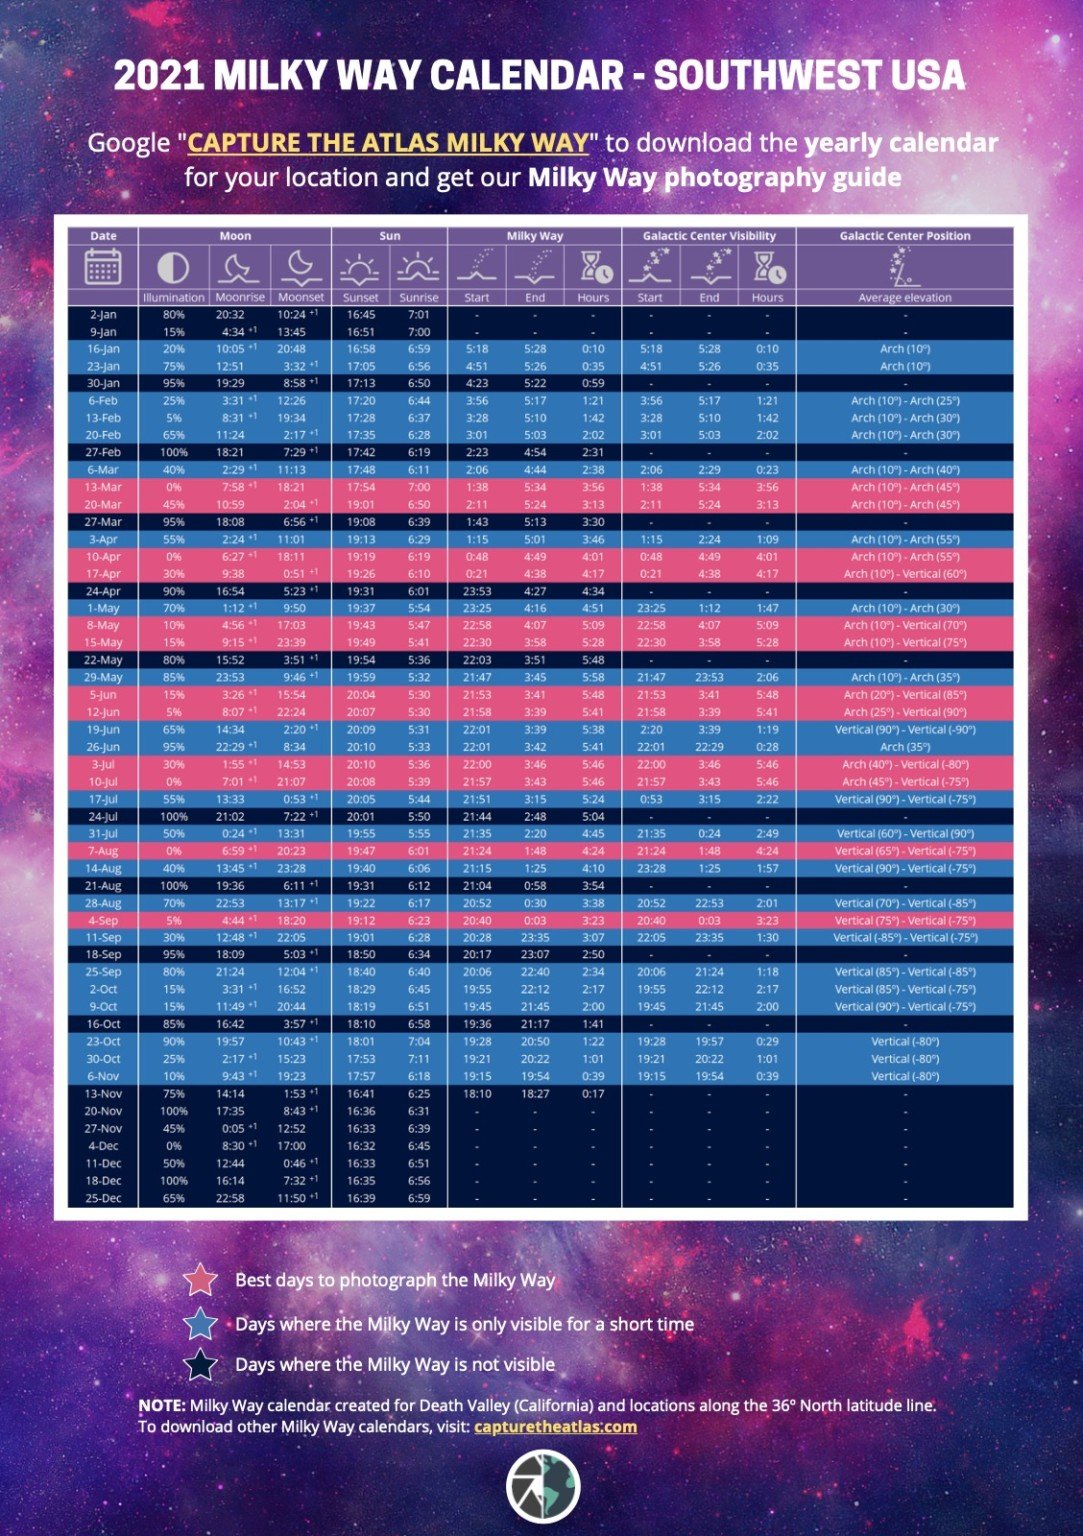 Use This Astro Calendar to Plan Your Milky Way Shots This Year PetaPixel